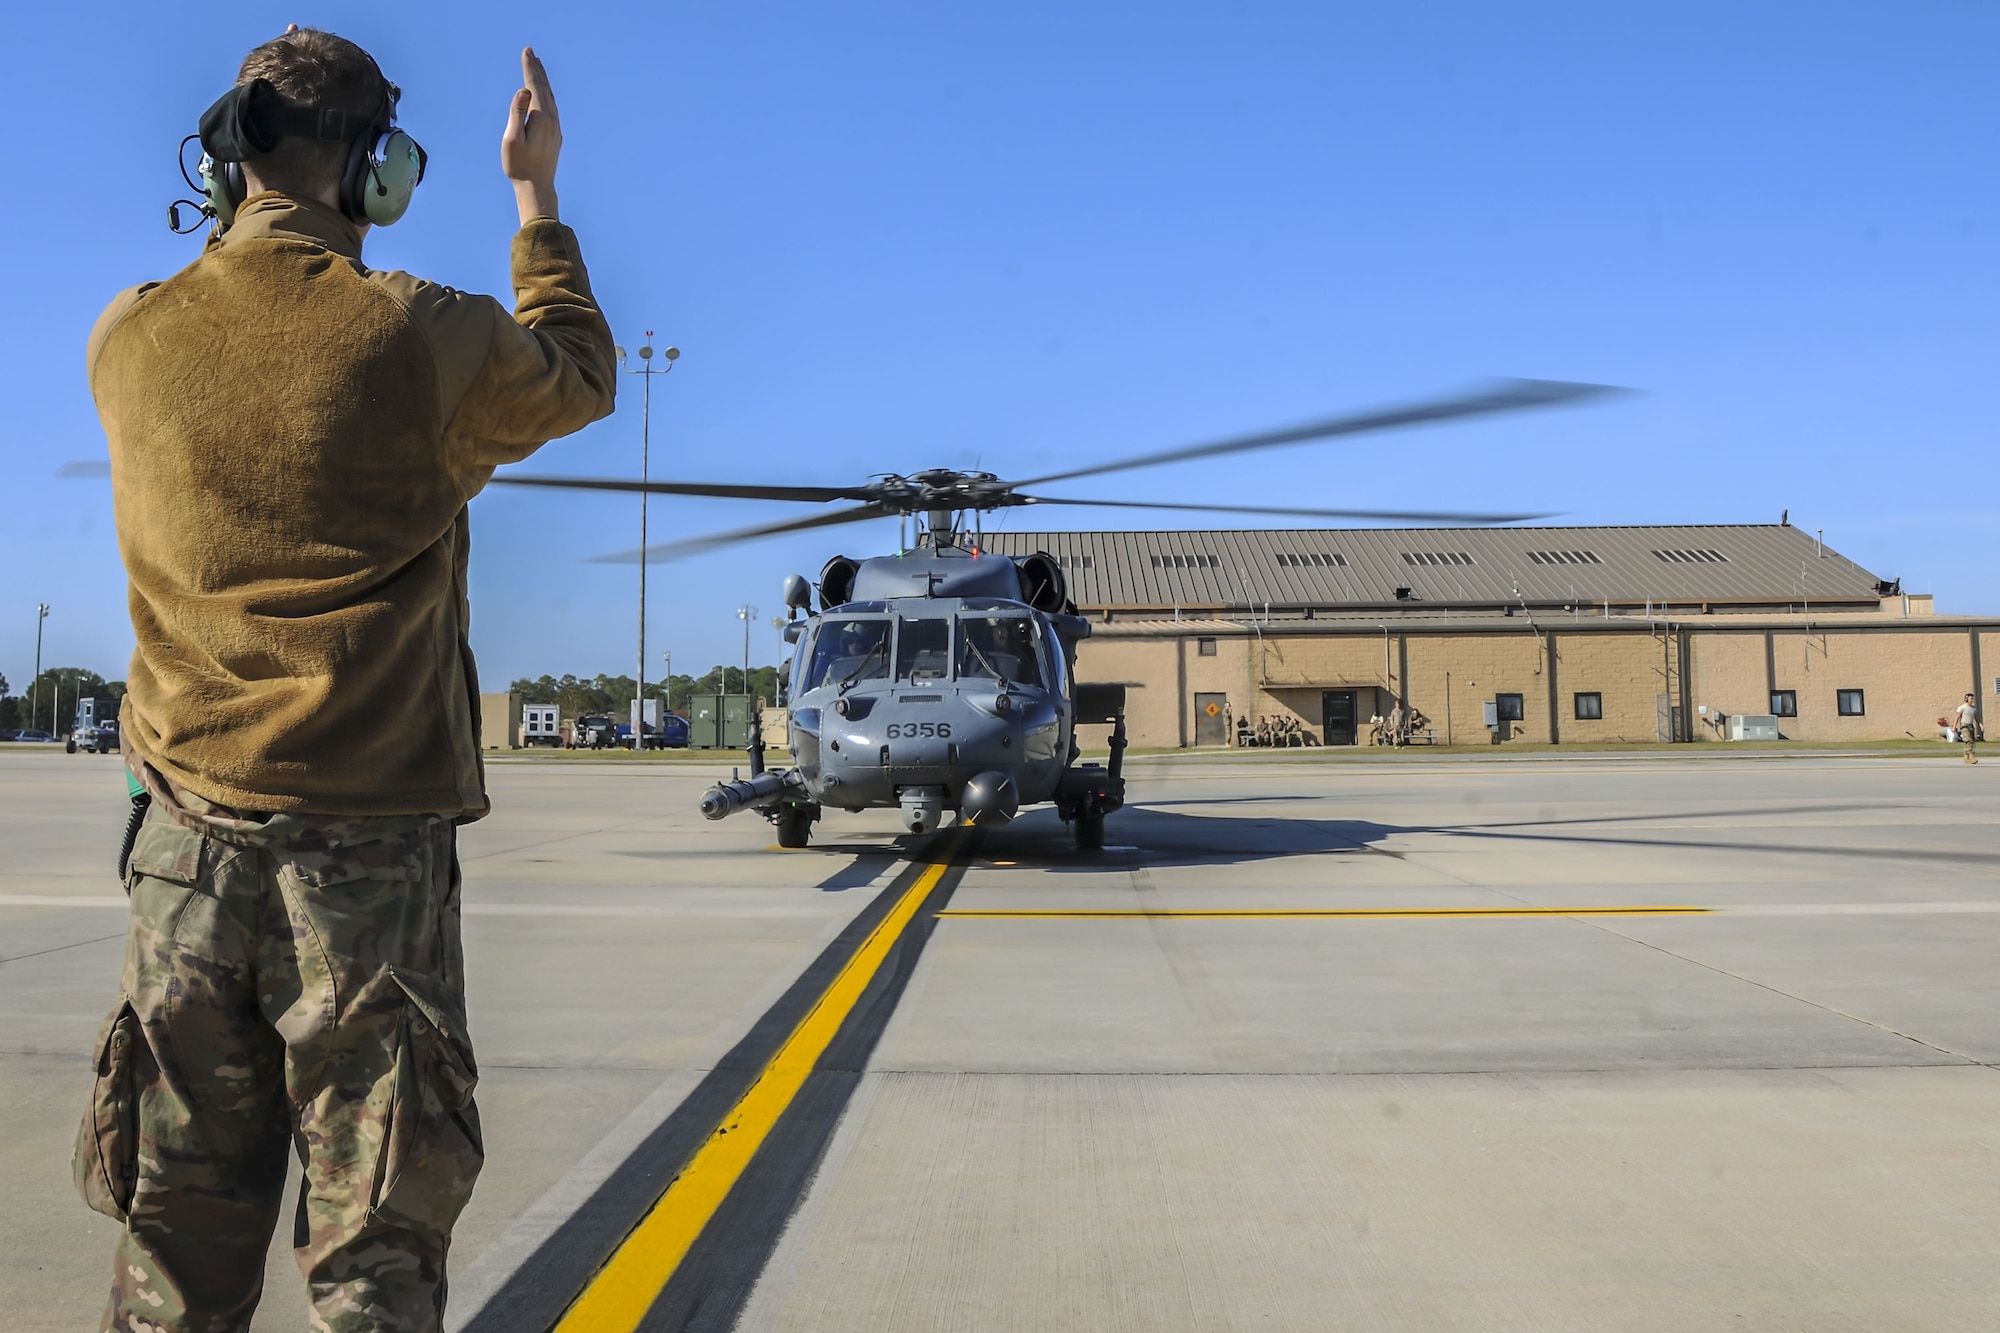 Senior Airman Nicholas Dacyk, 723d Aircraft Maintenance Squadron hydraulics systems apprentice, marshals an HH-60G Pave Hawk, Dec. 5, 2017, at Moody Air Force Base, Ga. As part of a Phase 1, Phase 2 exercise, the 23d Wing is evaluating its operations, maintenance and logistics to determine its readiness to rapidly deploy. The HH-60 capabilities were tested to determine the 723d Aircraft Maintenance Squadron’s ability to make a helicopter operational. (U.S. Air Force photo by Airman Eugene Oliver)